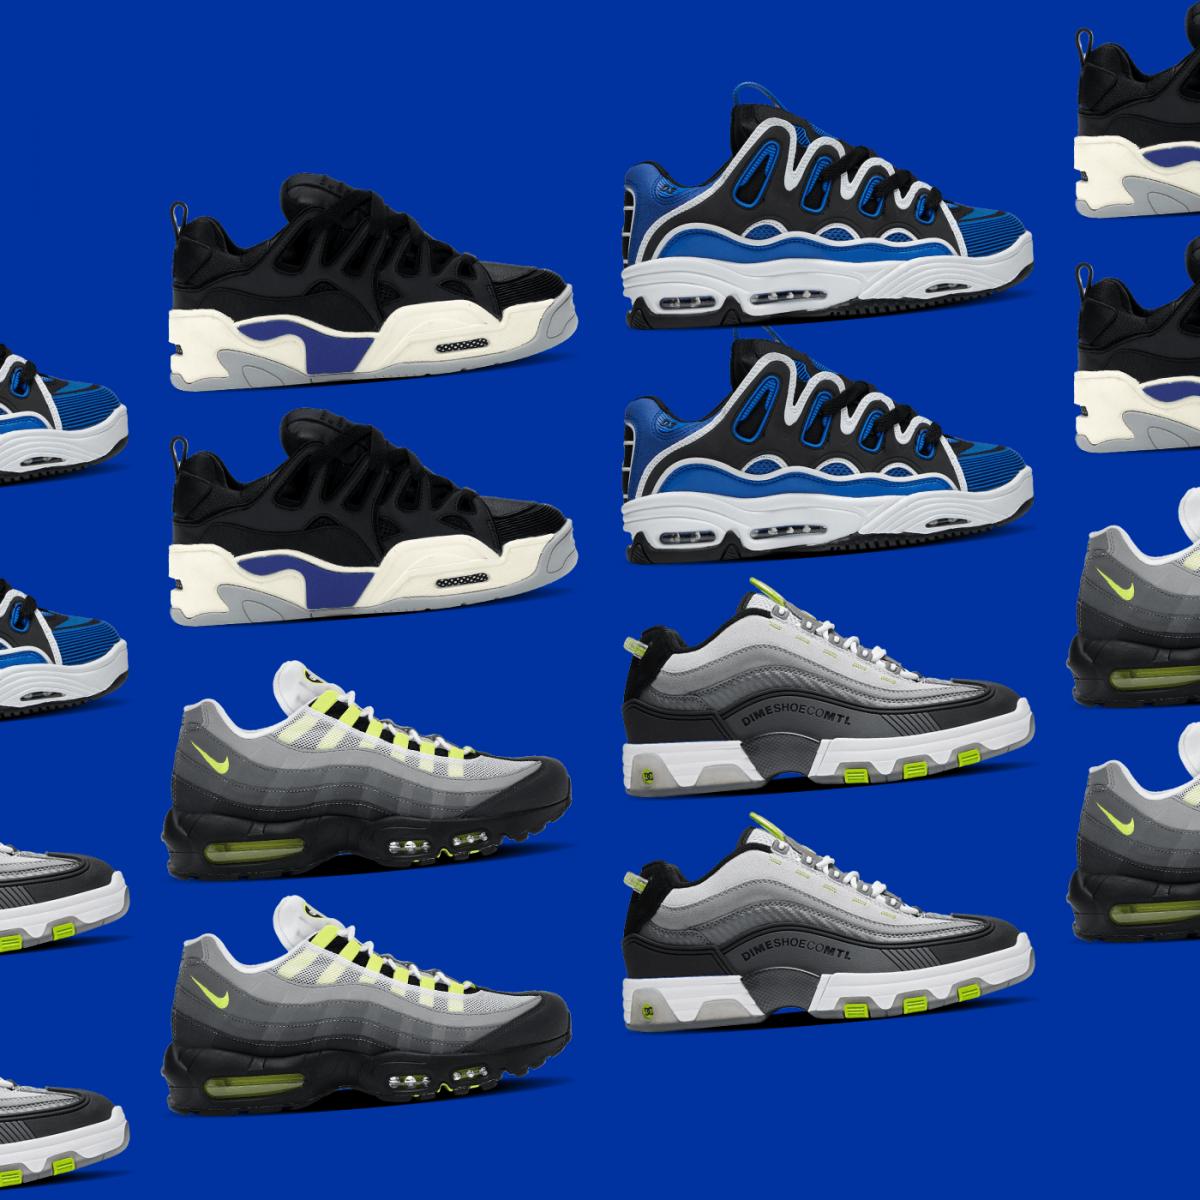 Everyday IP: The history of sneakers | Dennemeyer.com